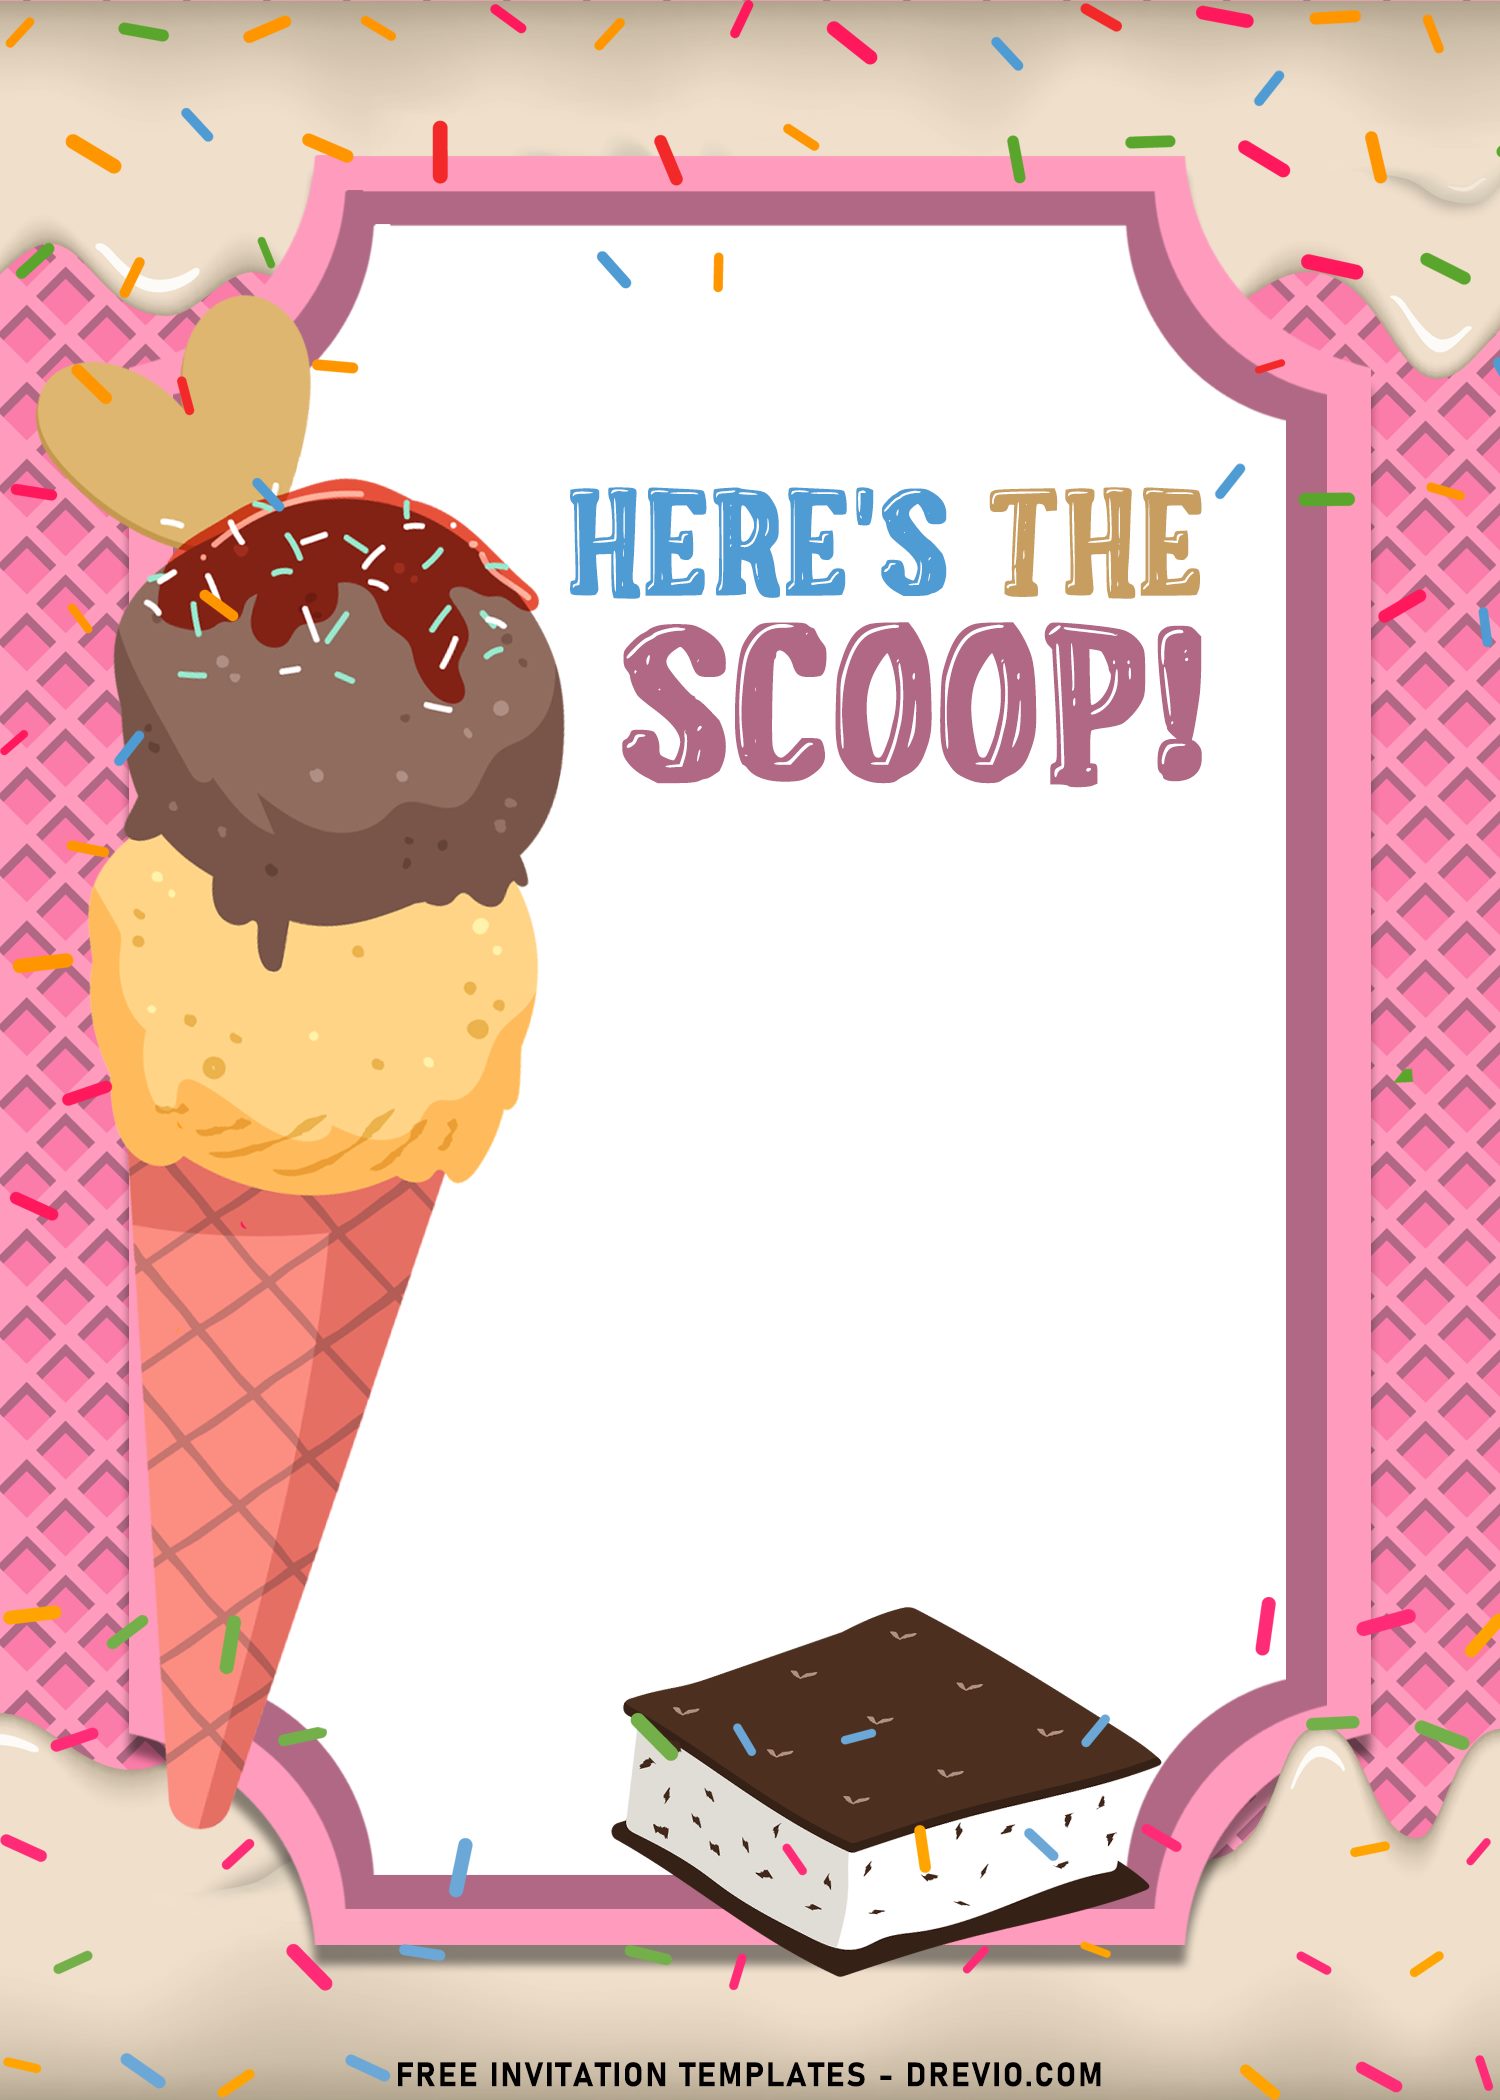 9 Ice Cream Sandwich Party Invitation Templates Download Hundreds